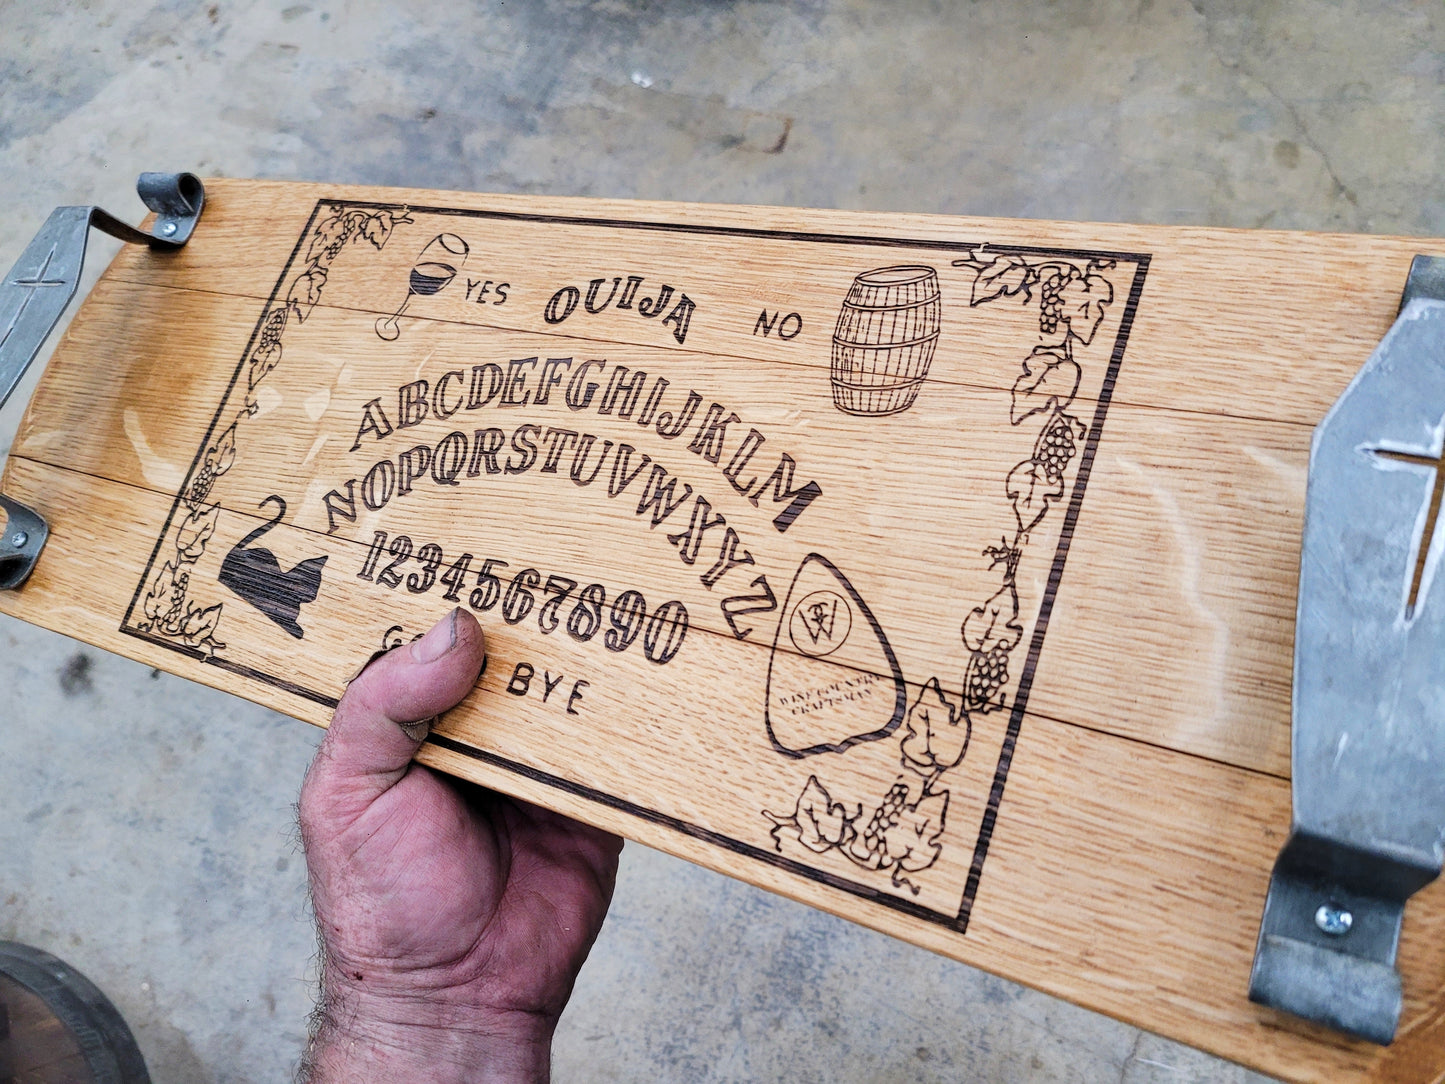 Halloween Cutting / Serving Board w/ Coffin Handles - Ouija - Made from retired California wine barrels. 100% Recycled!